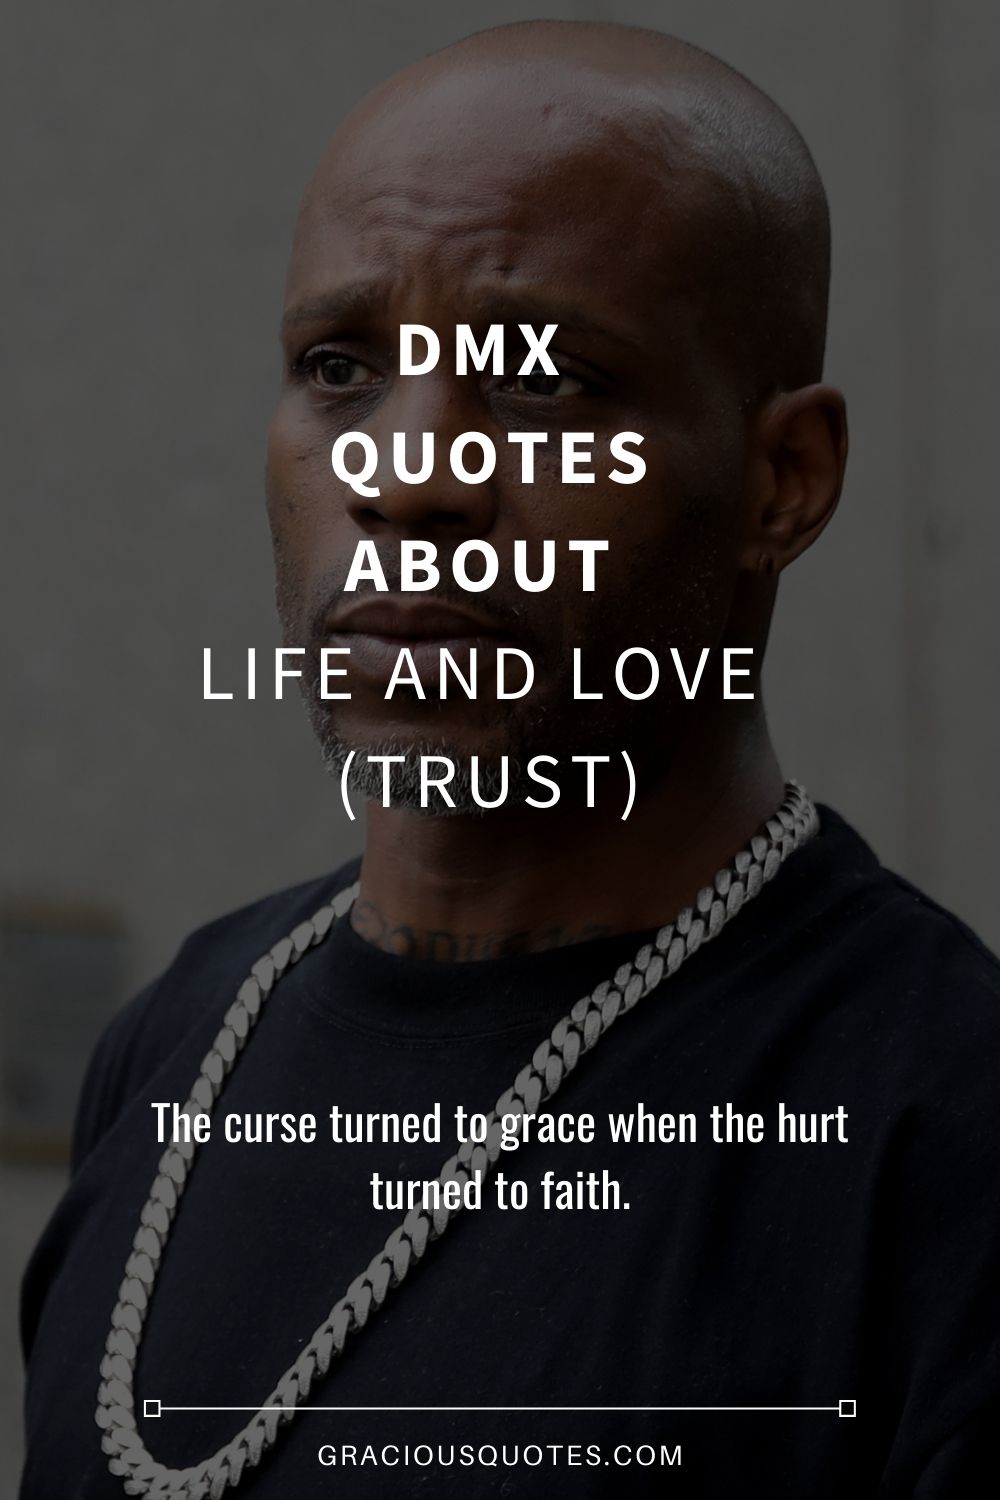 DMX Quotes About Life and Love (TRUST) - Gracious Quotes